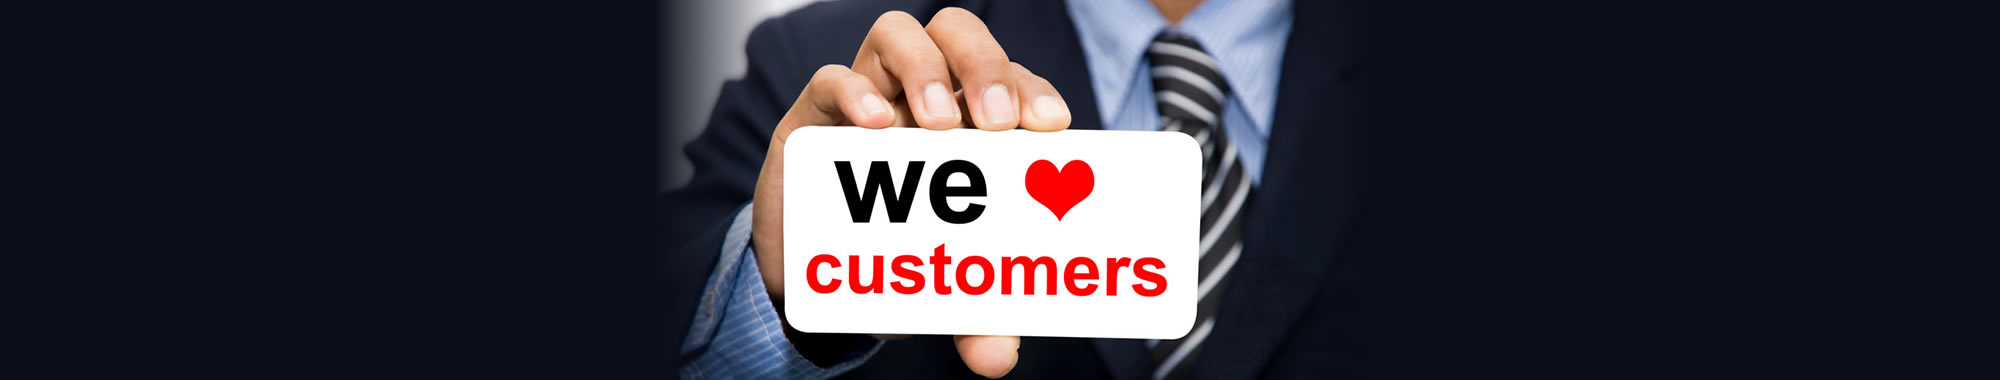 An image with the words "We love customers" depicts a Refer A Client special offer.